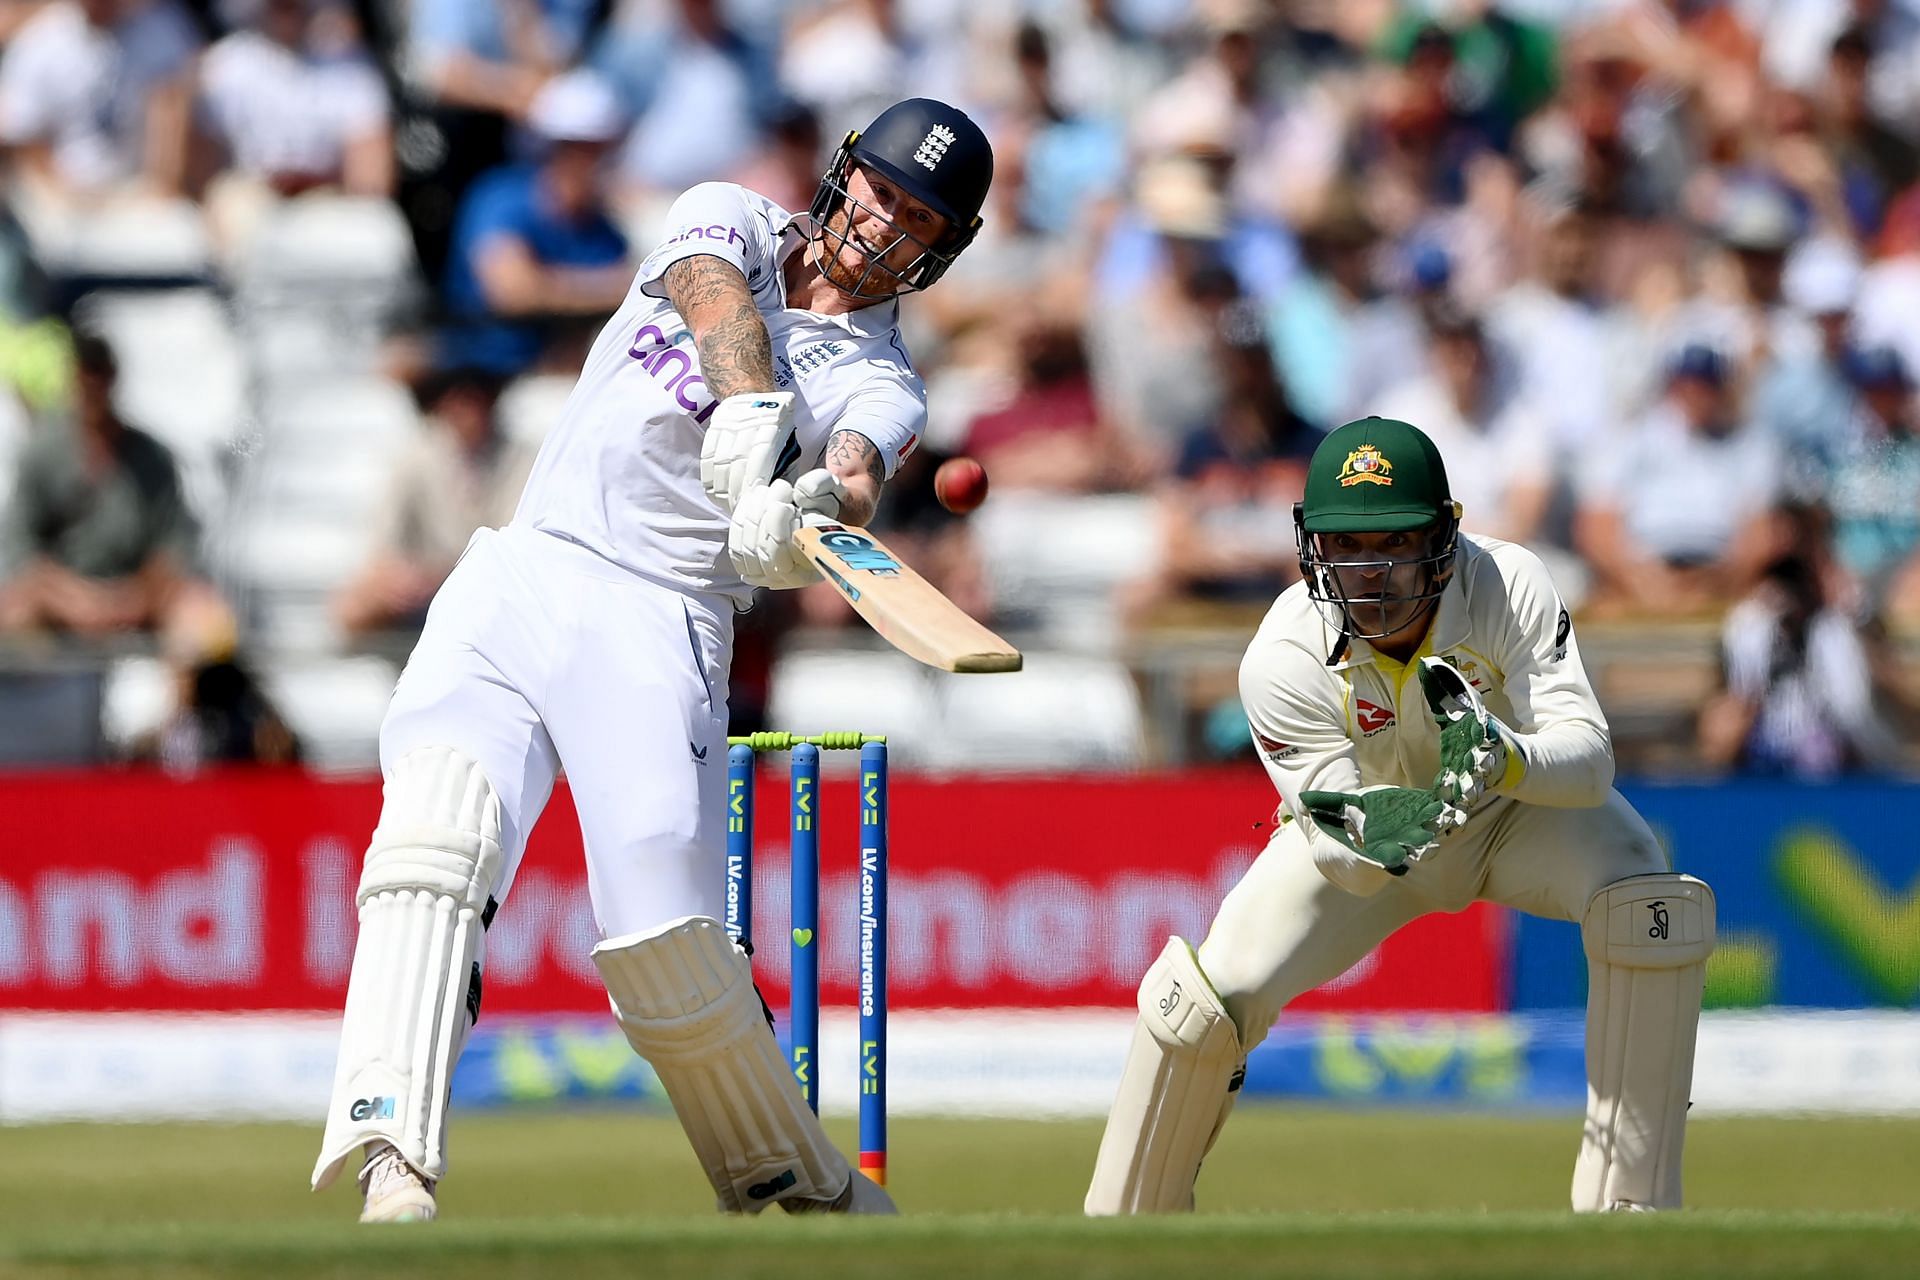 Ben Stokes scored a crucial 80 in the first innings at Headingley. (Pic: Getty Images)